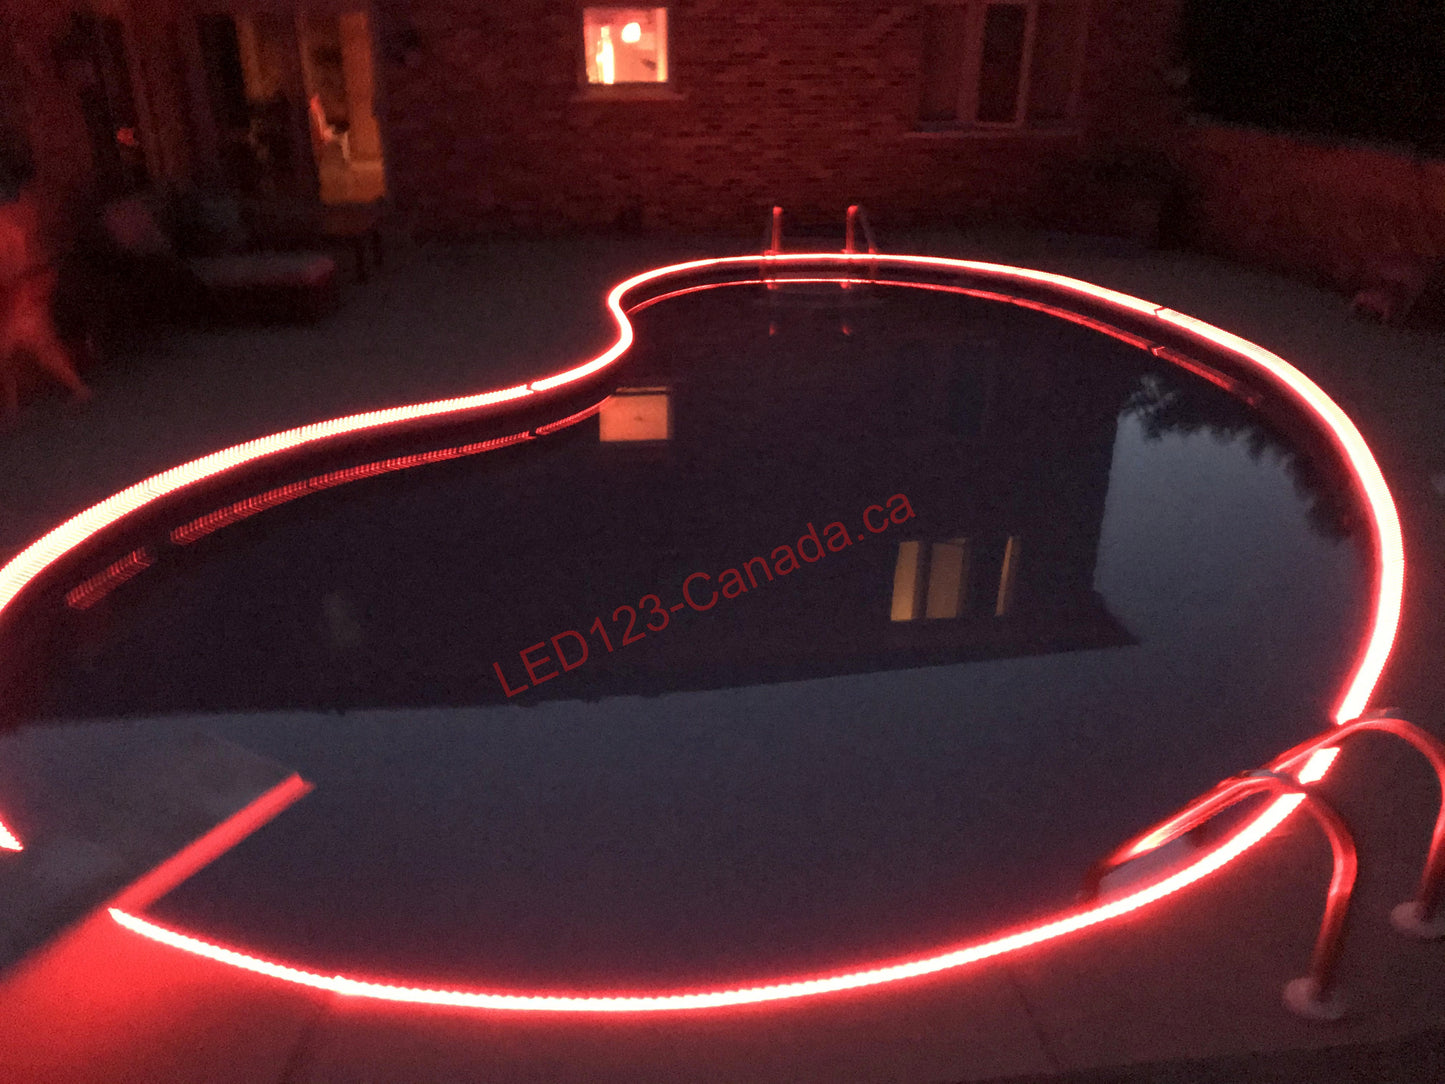 WATERPROOF LED FLEXIBLE STRIP FOR SWIMMING POOL/FOUNTAIN LIGHTS KIT